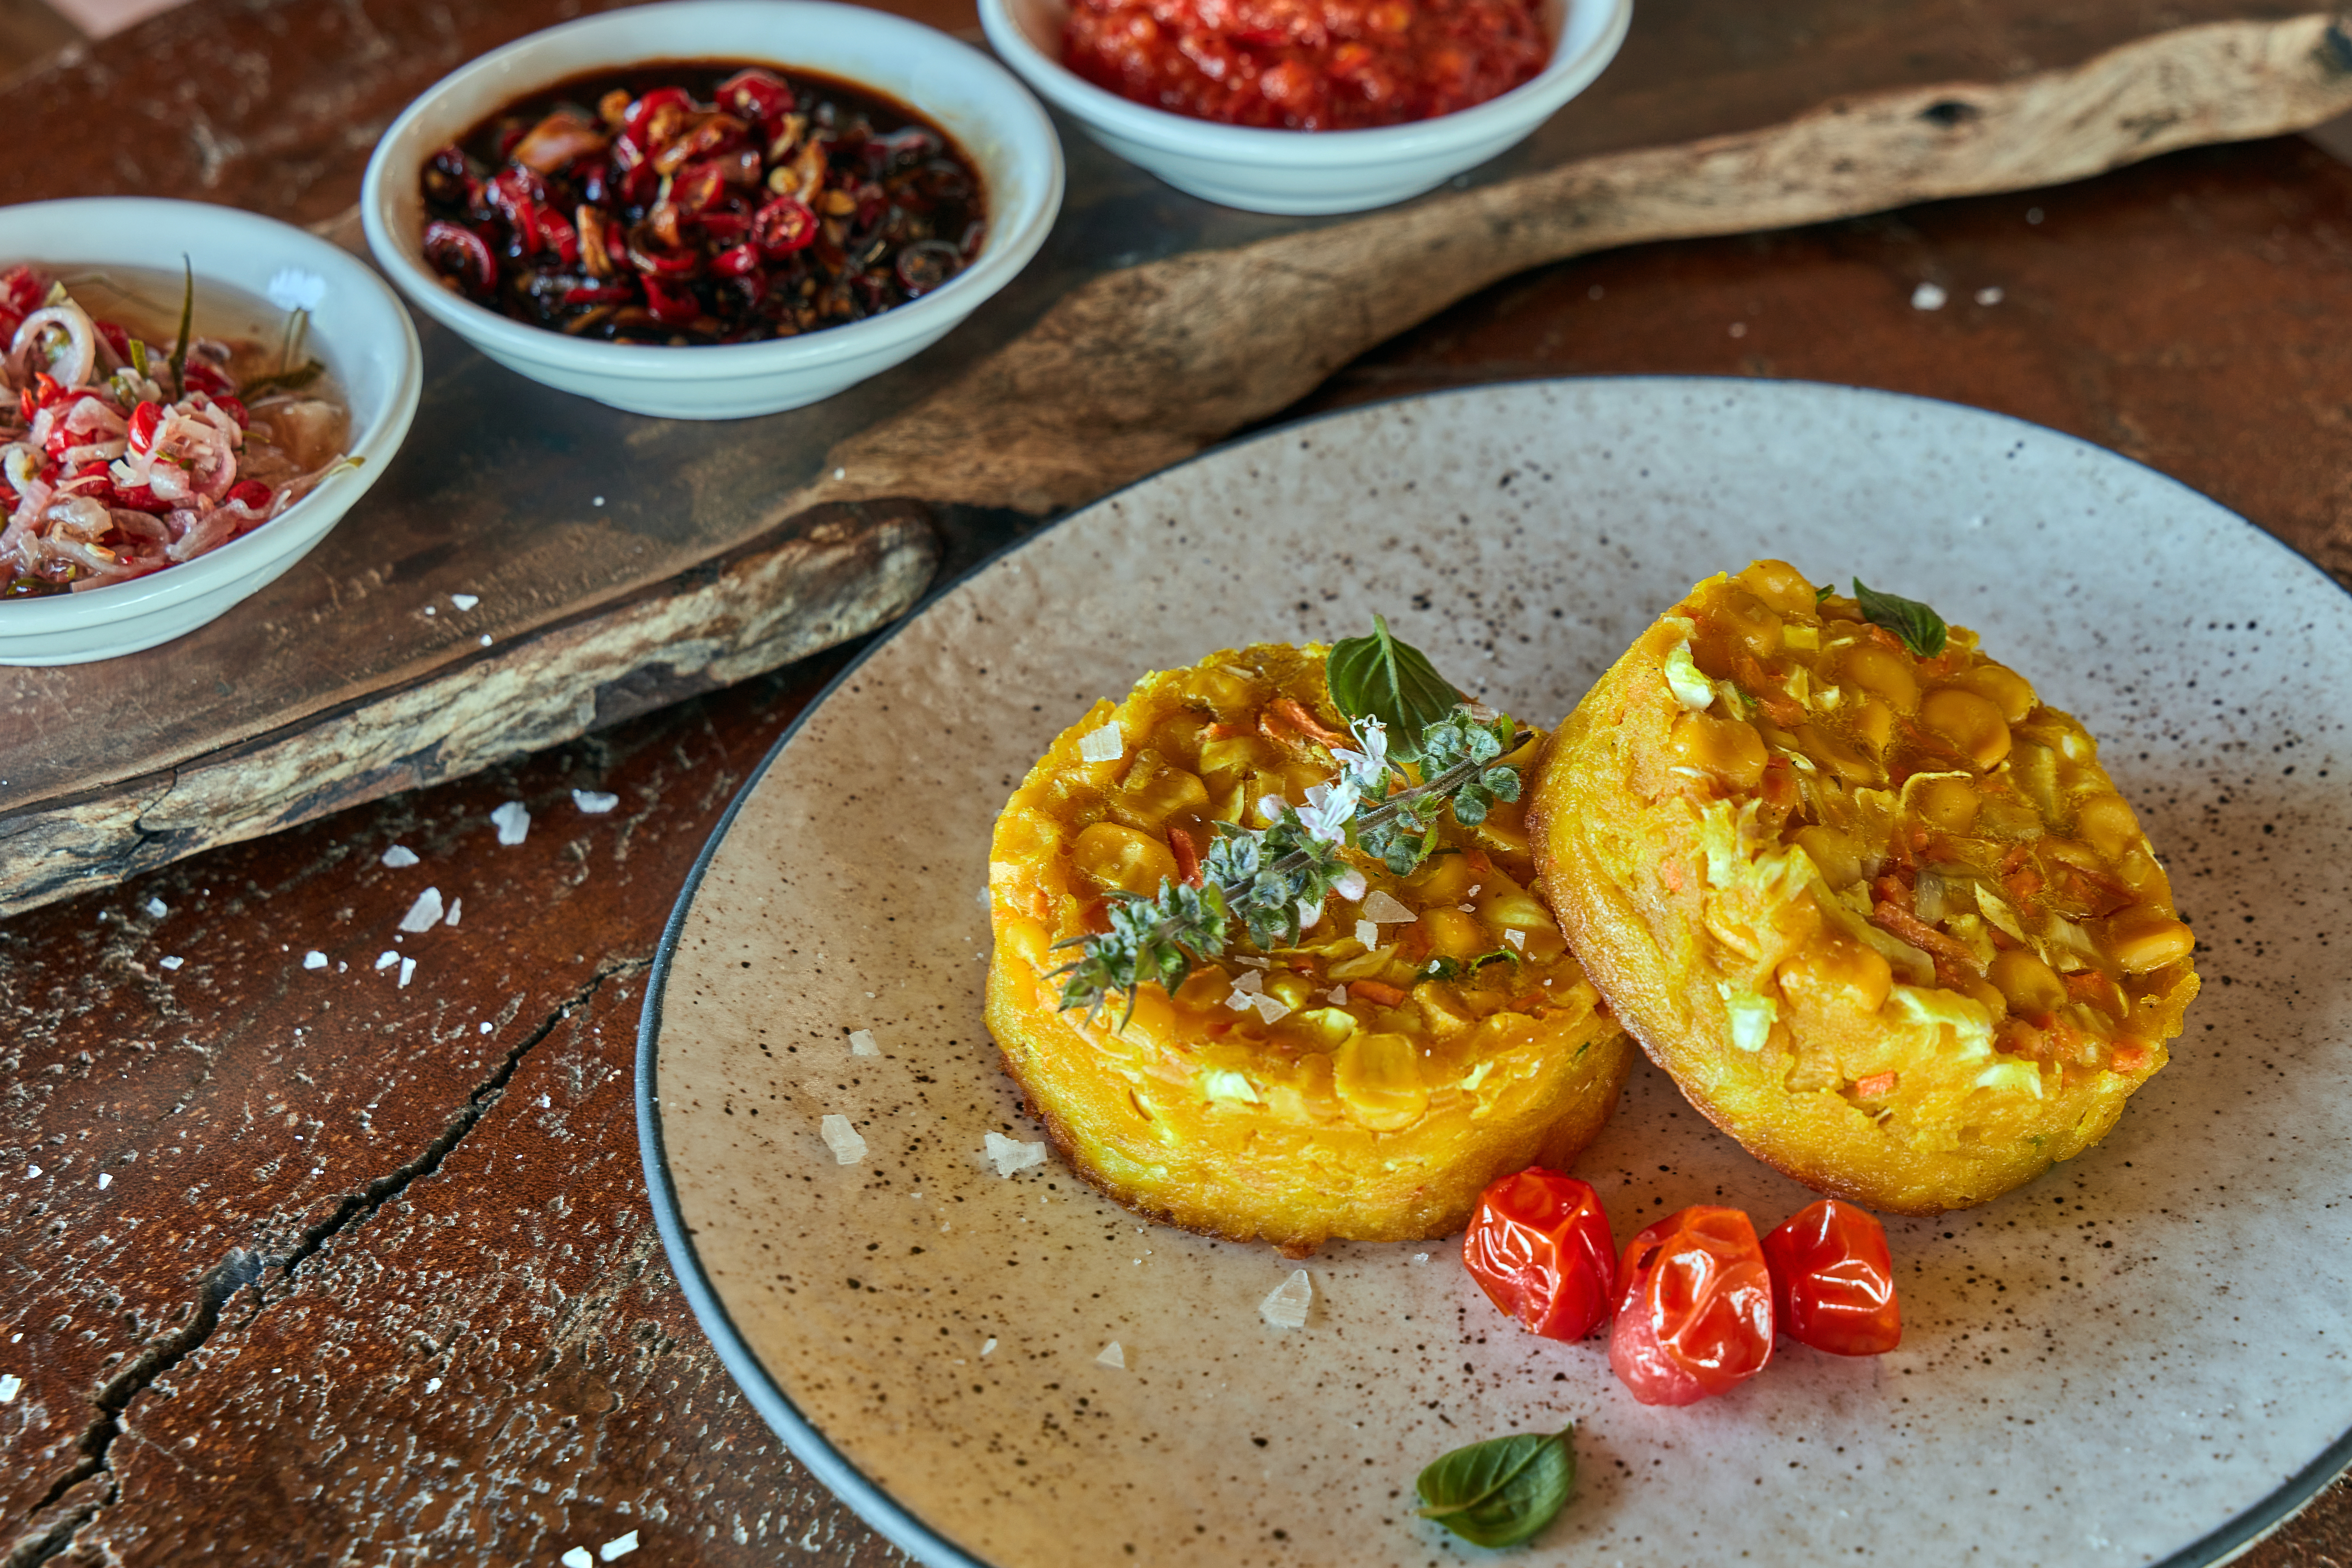 #Meatfree Monday: Indonesian Sweetcorn Fritters Recipe from Bawah Reserve, Indonesia